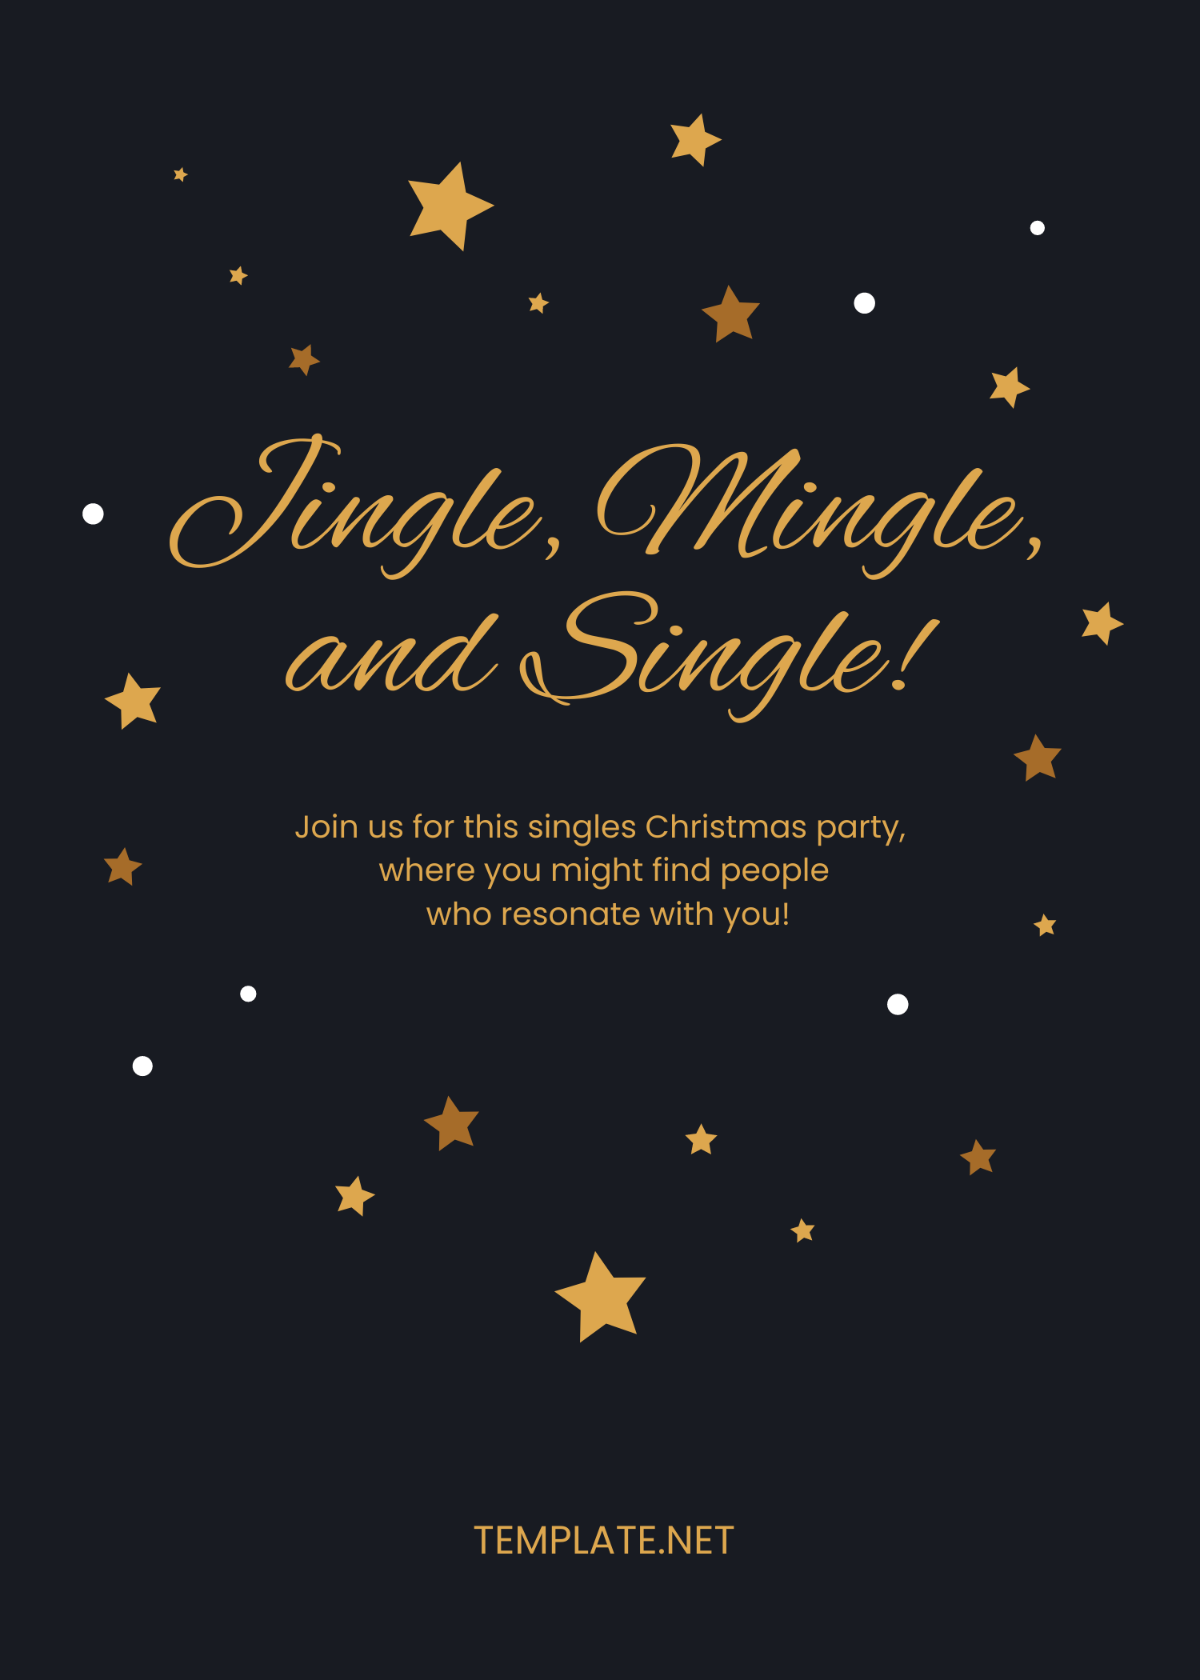 Black and Gold Christmas Invitation Template